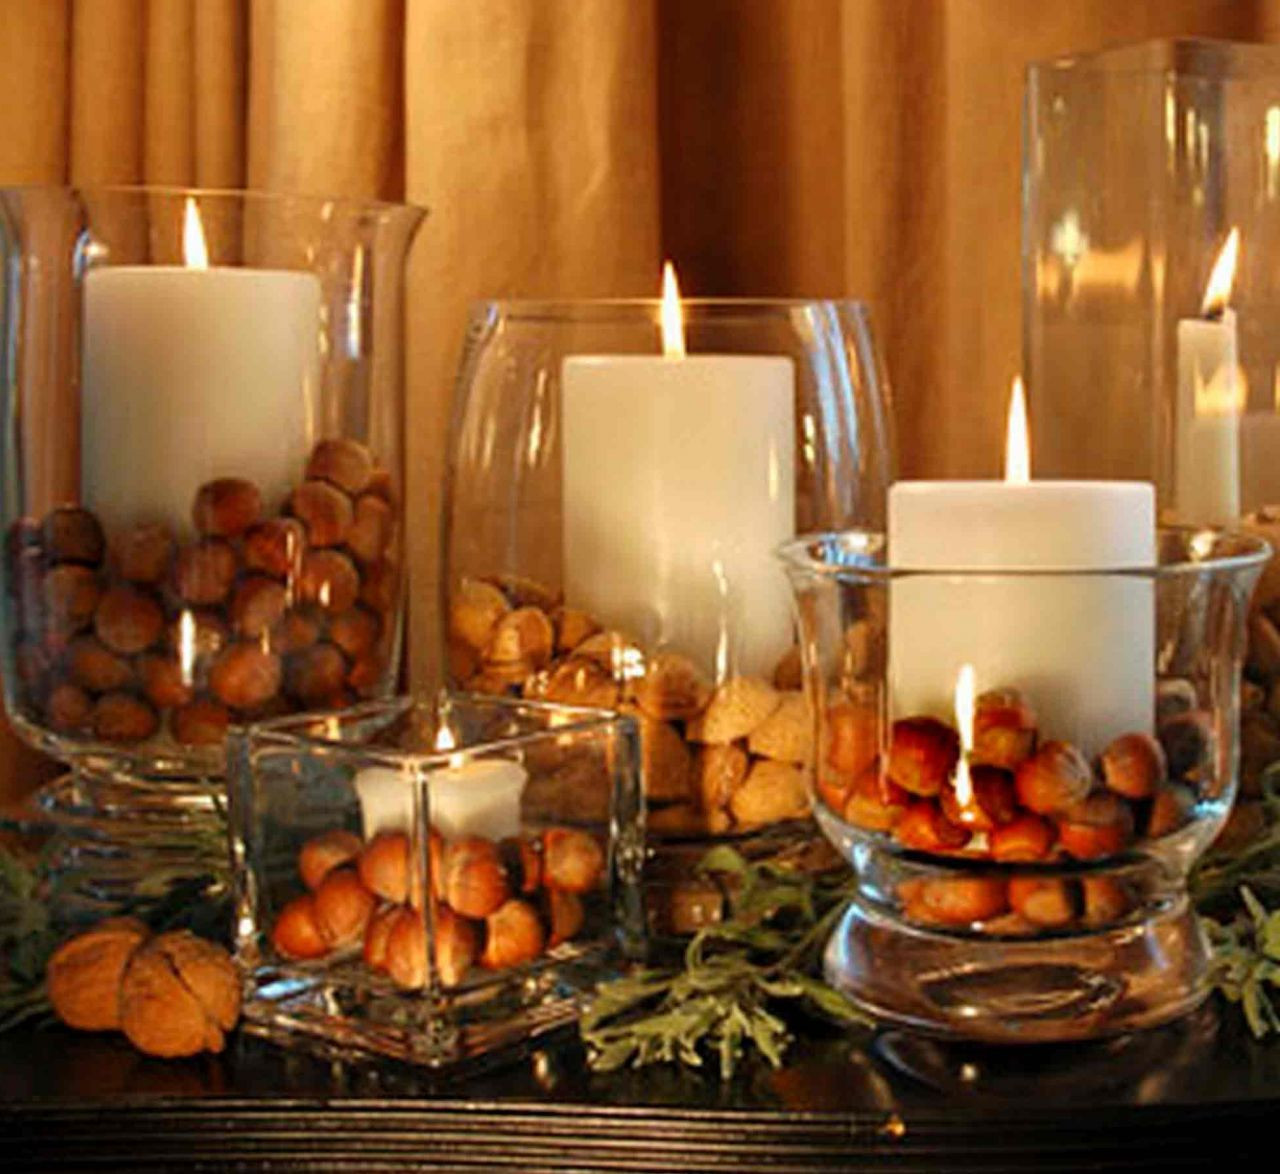 Centerpiece Ideas For Dinner Party
 Fall Decorations For Dinner Party Centerpiece